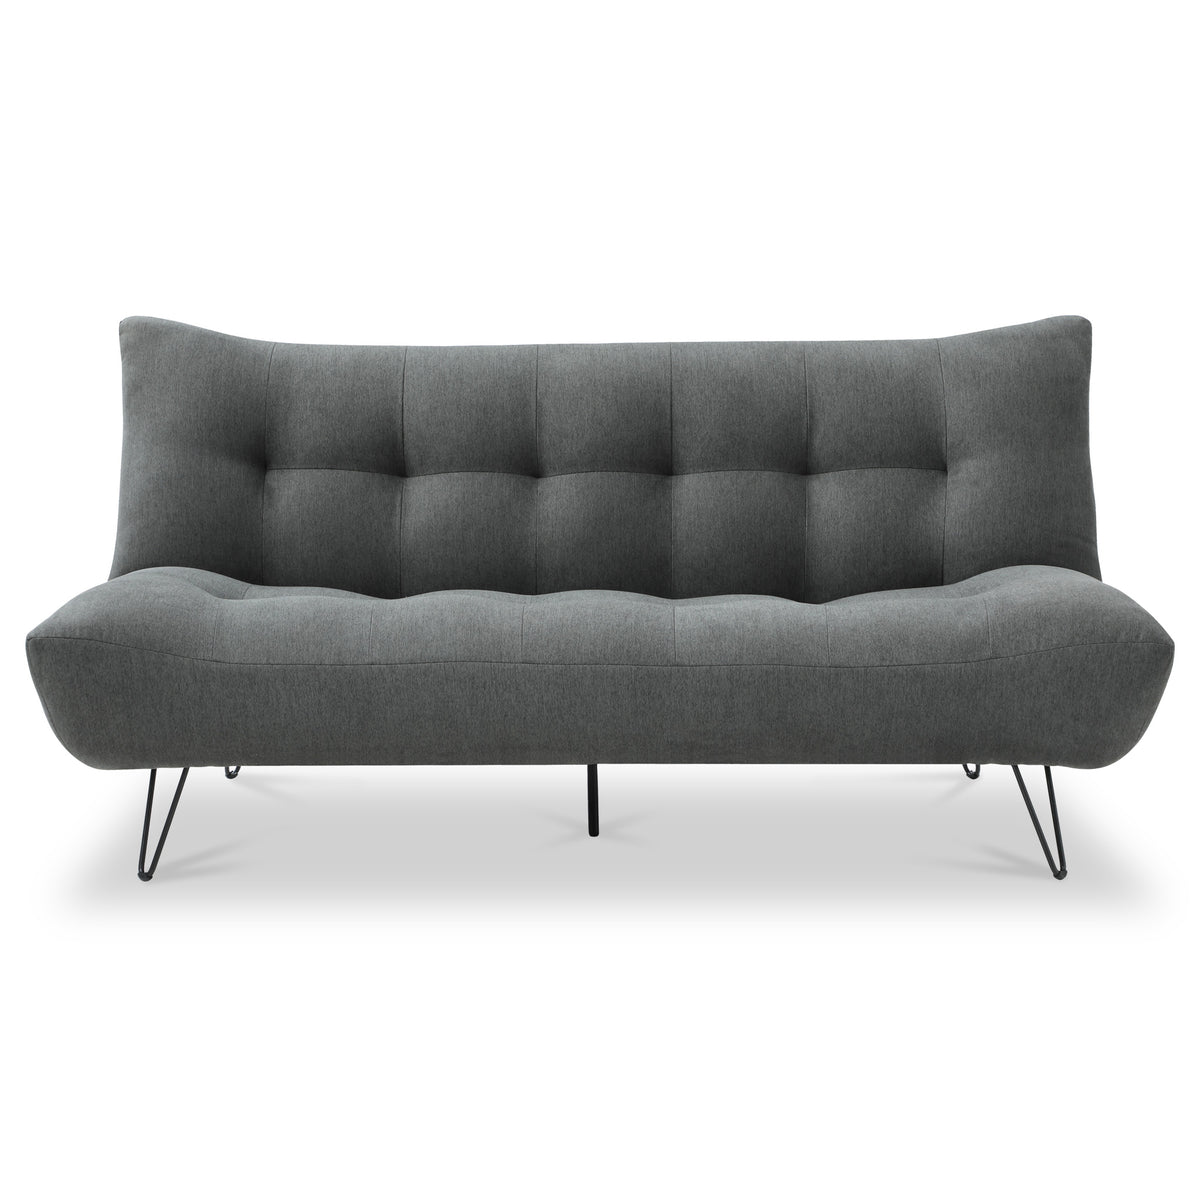 Pandora Grey Click Clack Sofabed from Roseland Furniture